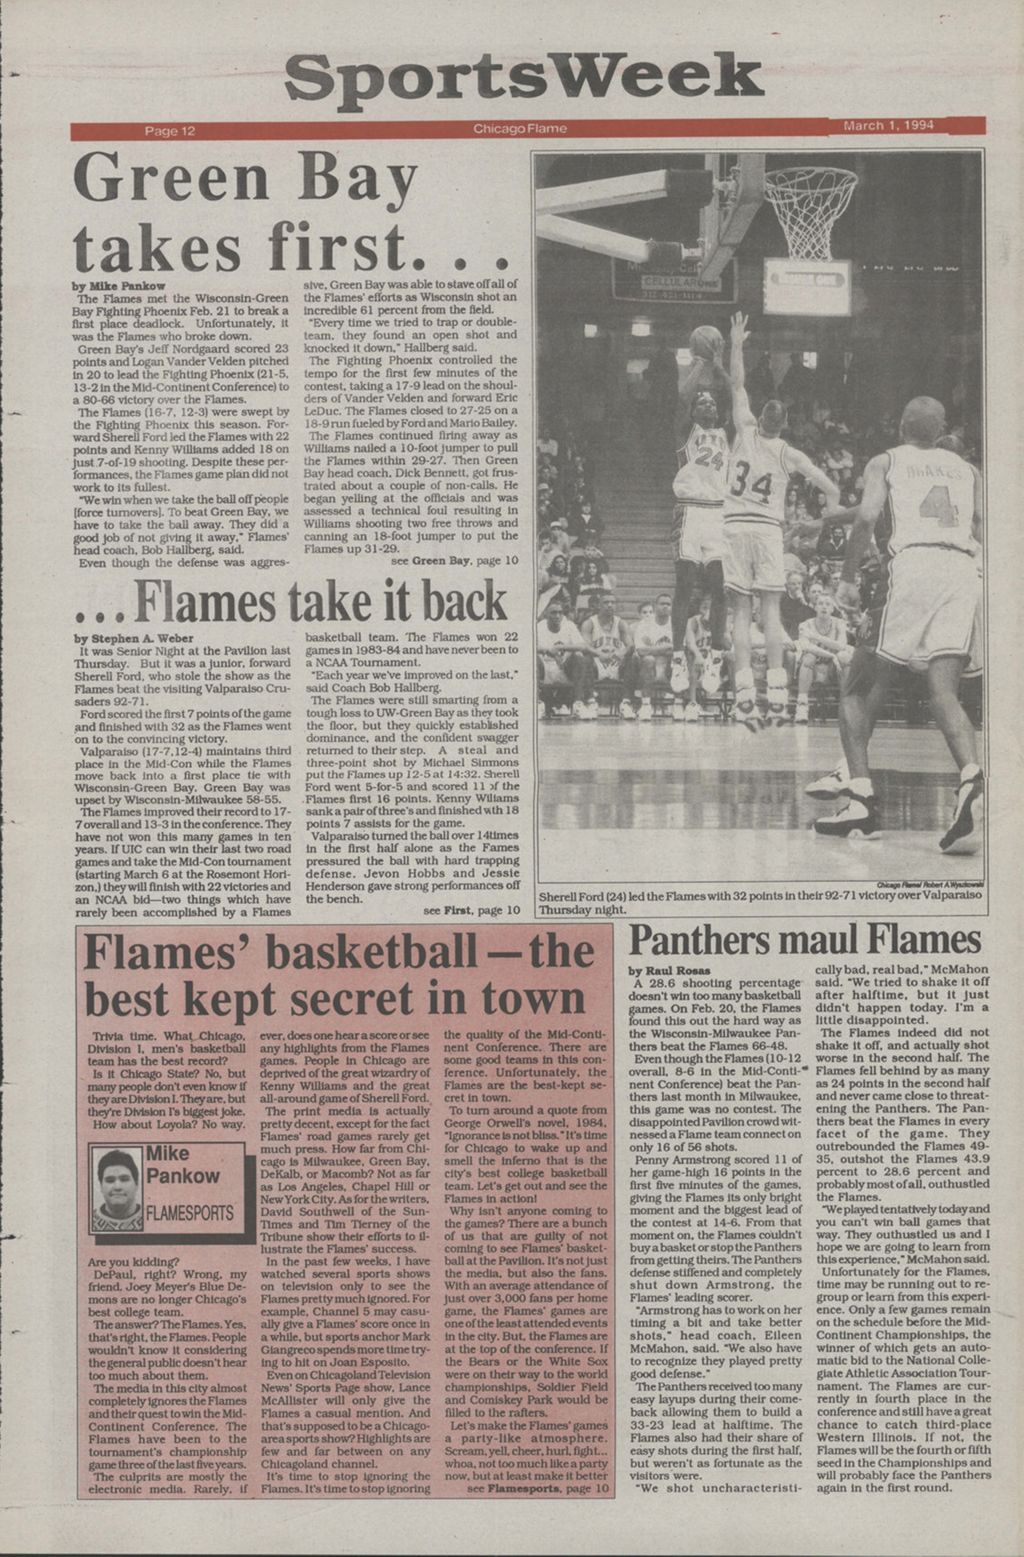 Chicago Flame (March 1, 1994)